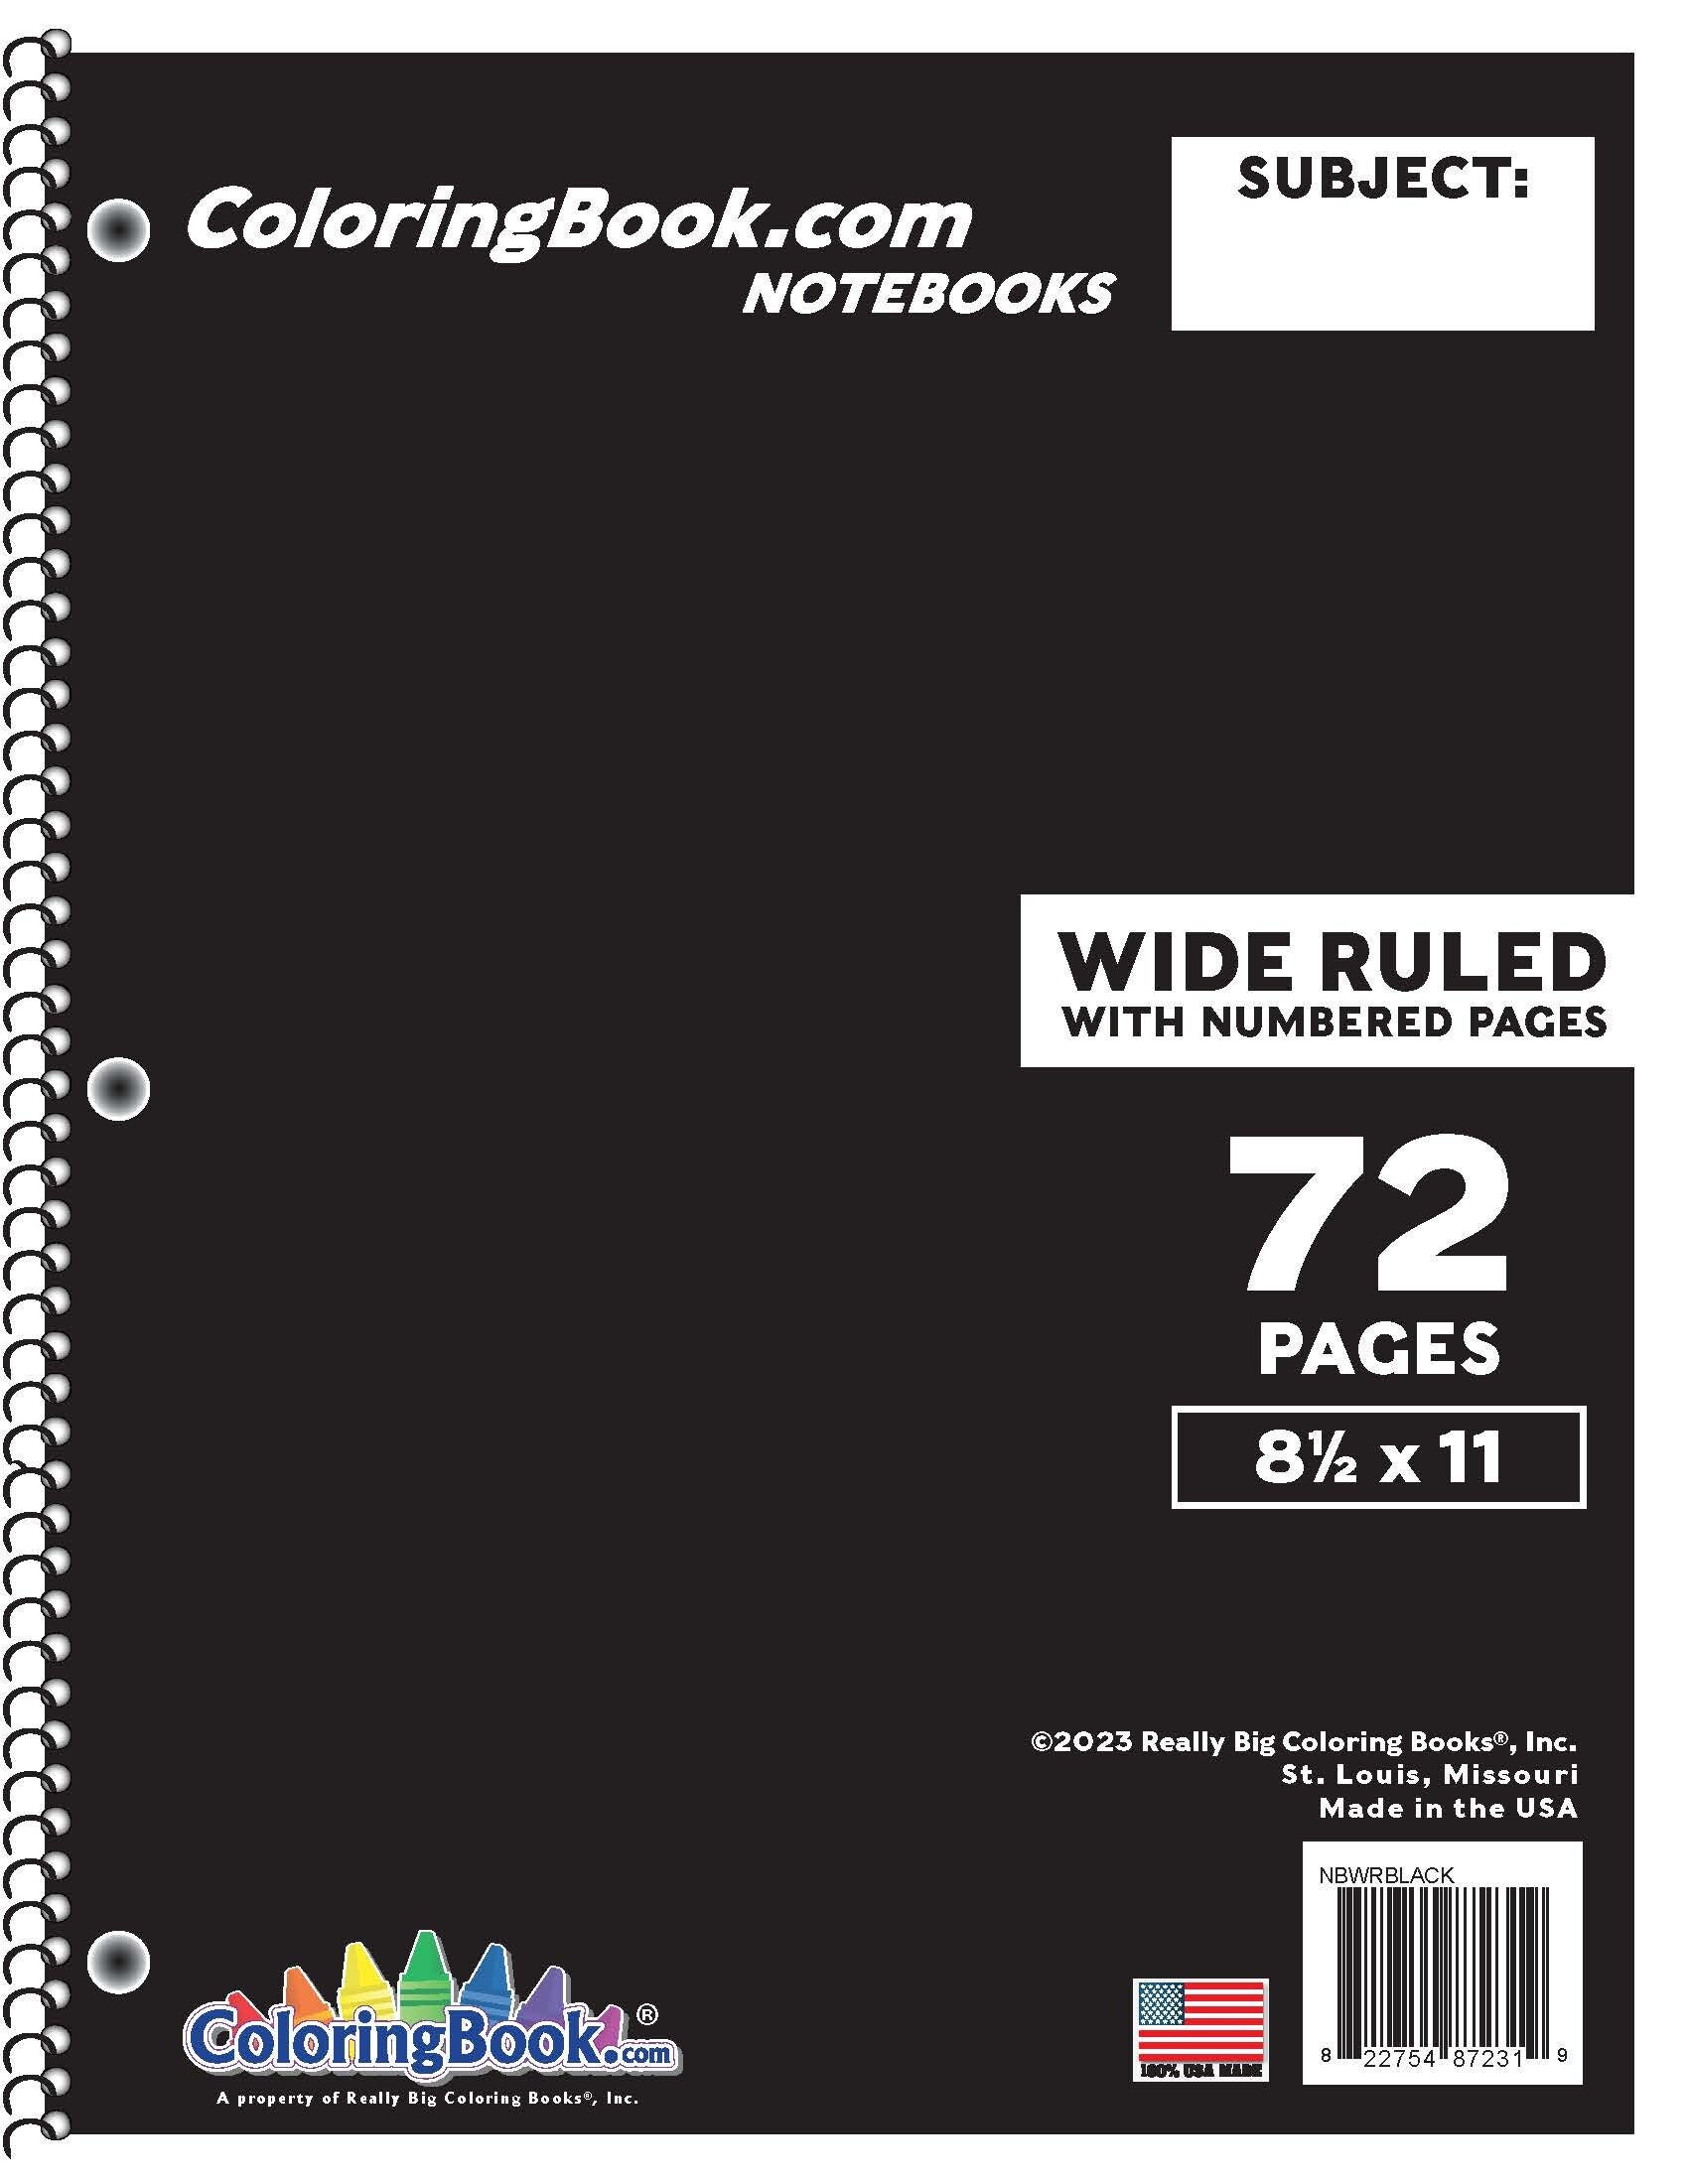 Full Wide Ruled NoteBook 50 pages, Custom Made with 20% MORE writing Space  - NEW